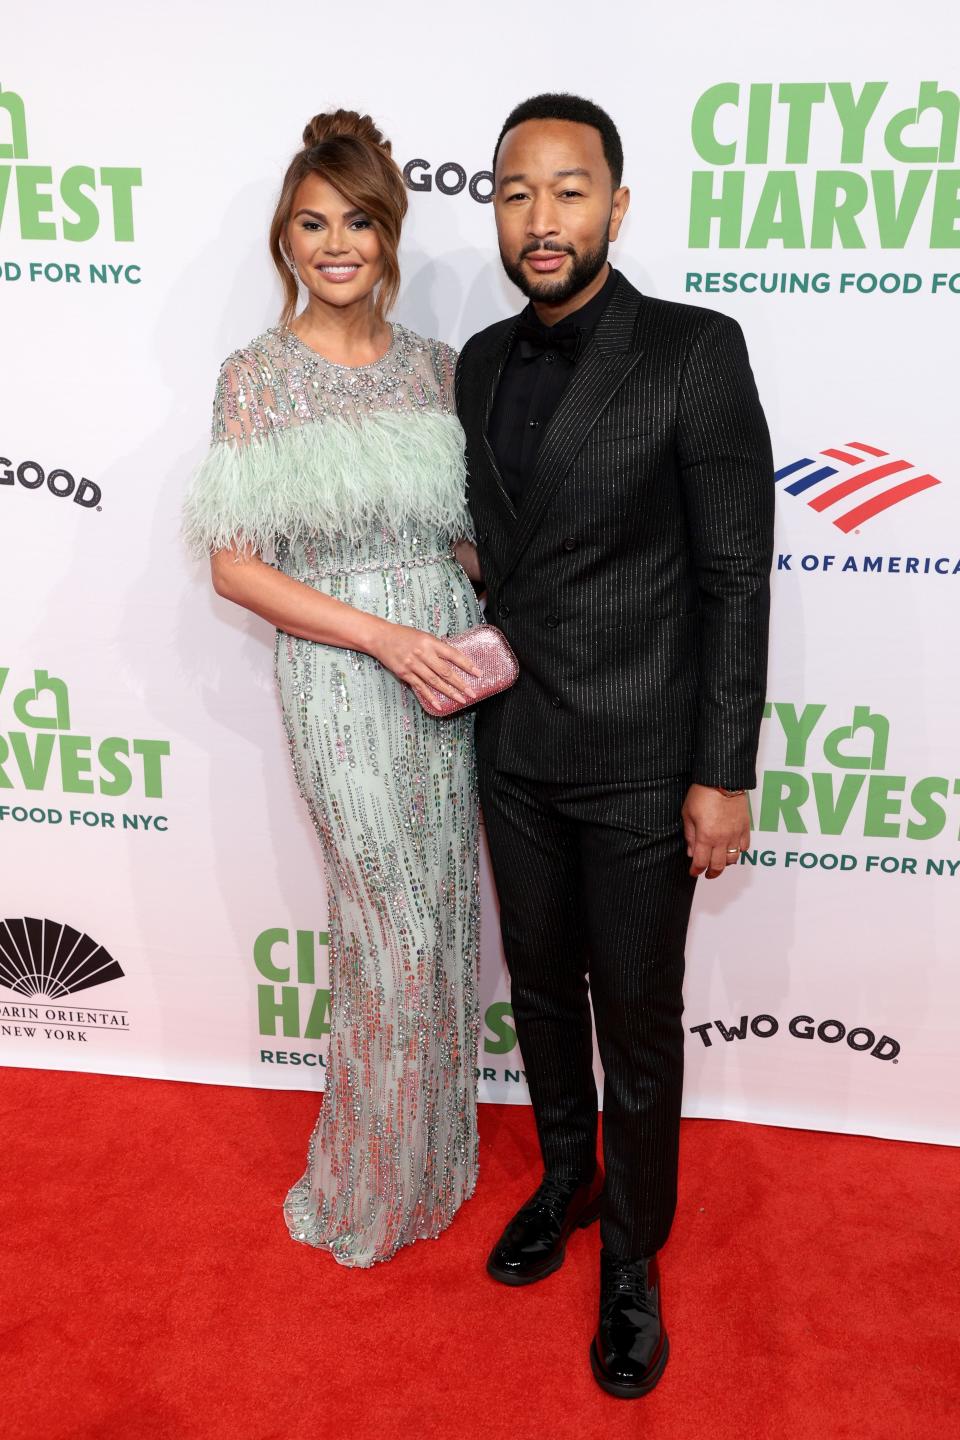 Chrissy Teigen and John Legend attend a City Harvest fundraiser in New York on April 26, 2022, to help provide meals for those in need.